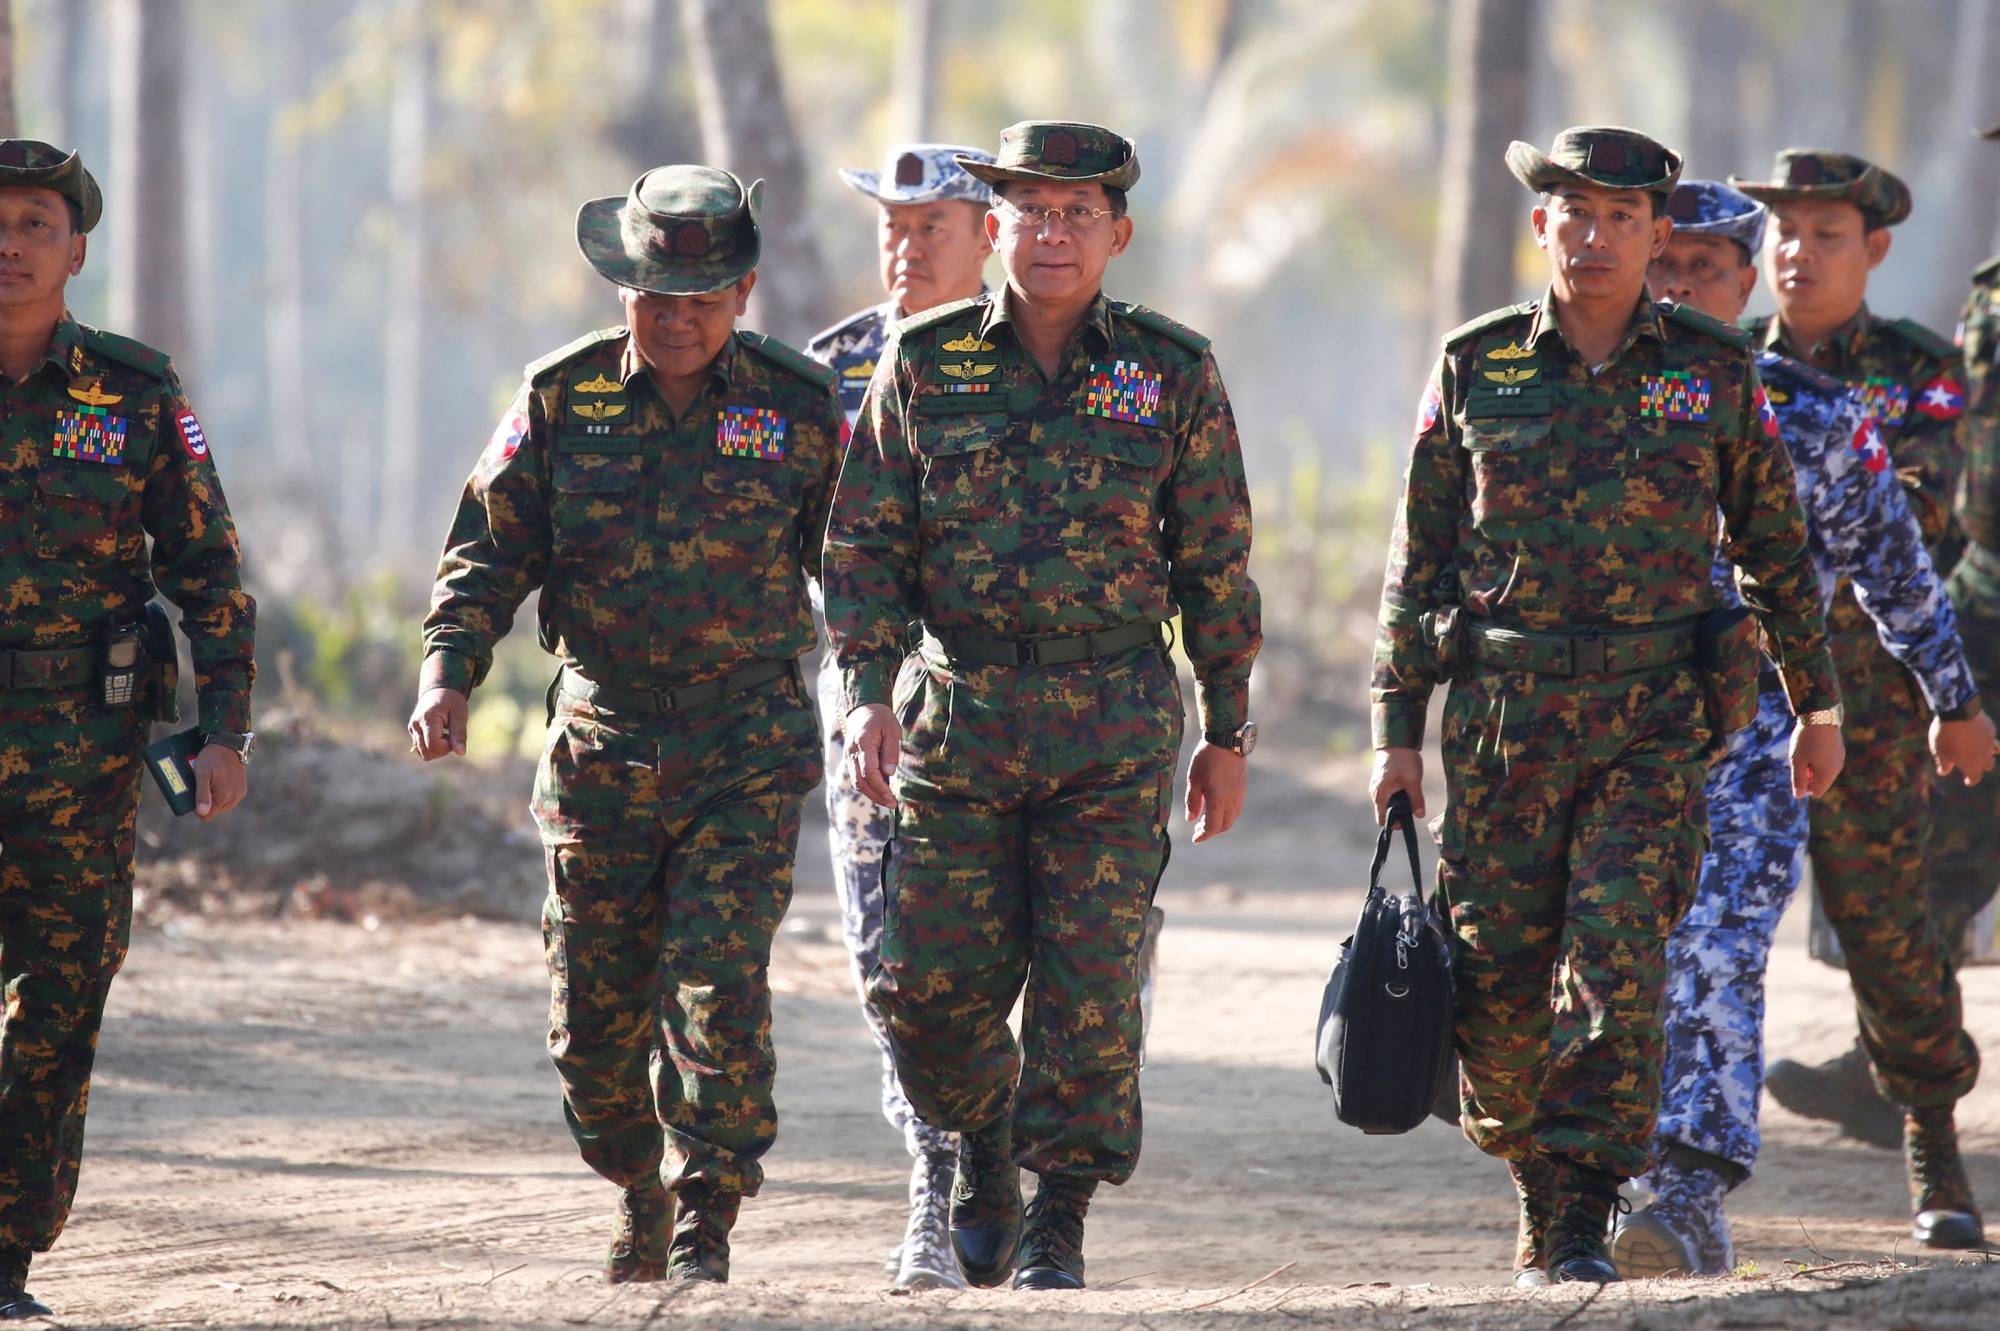 Myanmar military commander Gen. Min Aung Hlaing (center) and senior commanders arrive for joint exercises in the Irrawaddy Delta region in 2018. | POOL / VIA AFP-JIJI